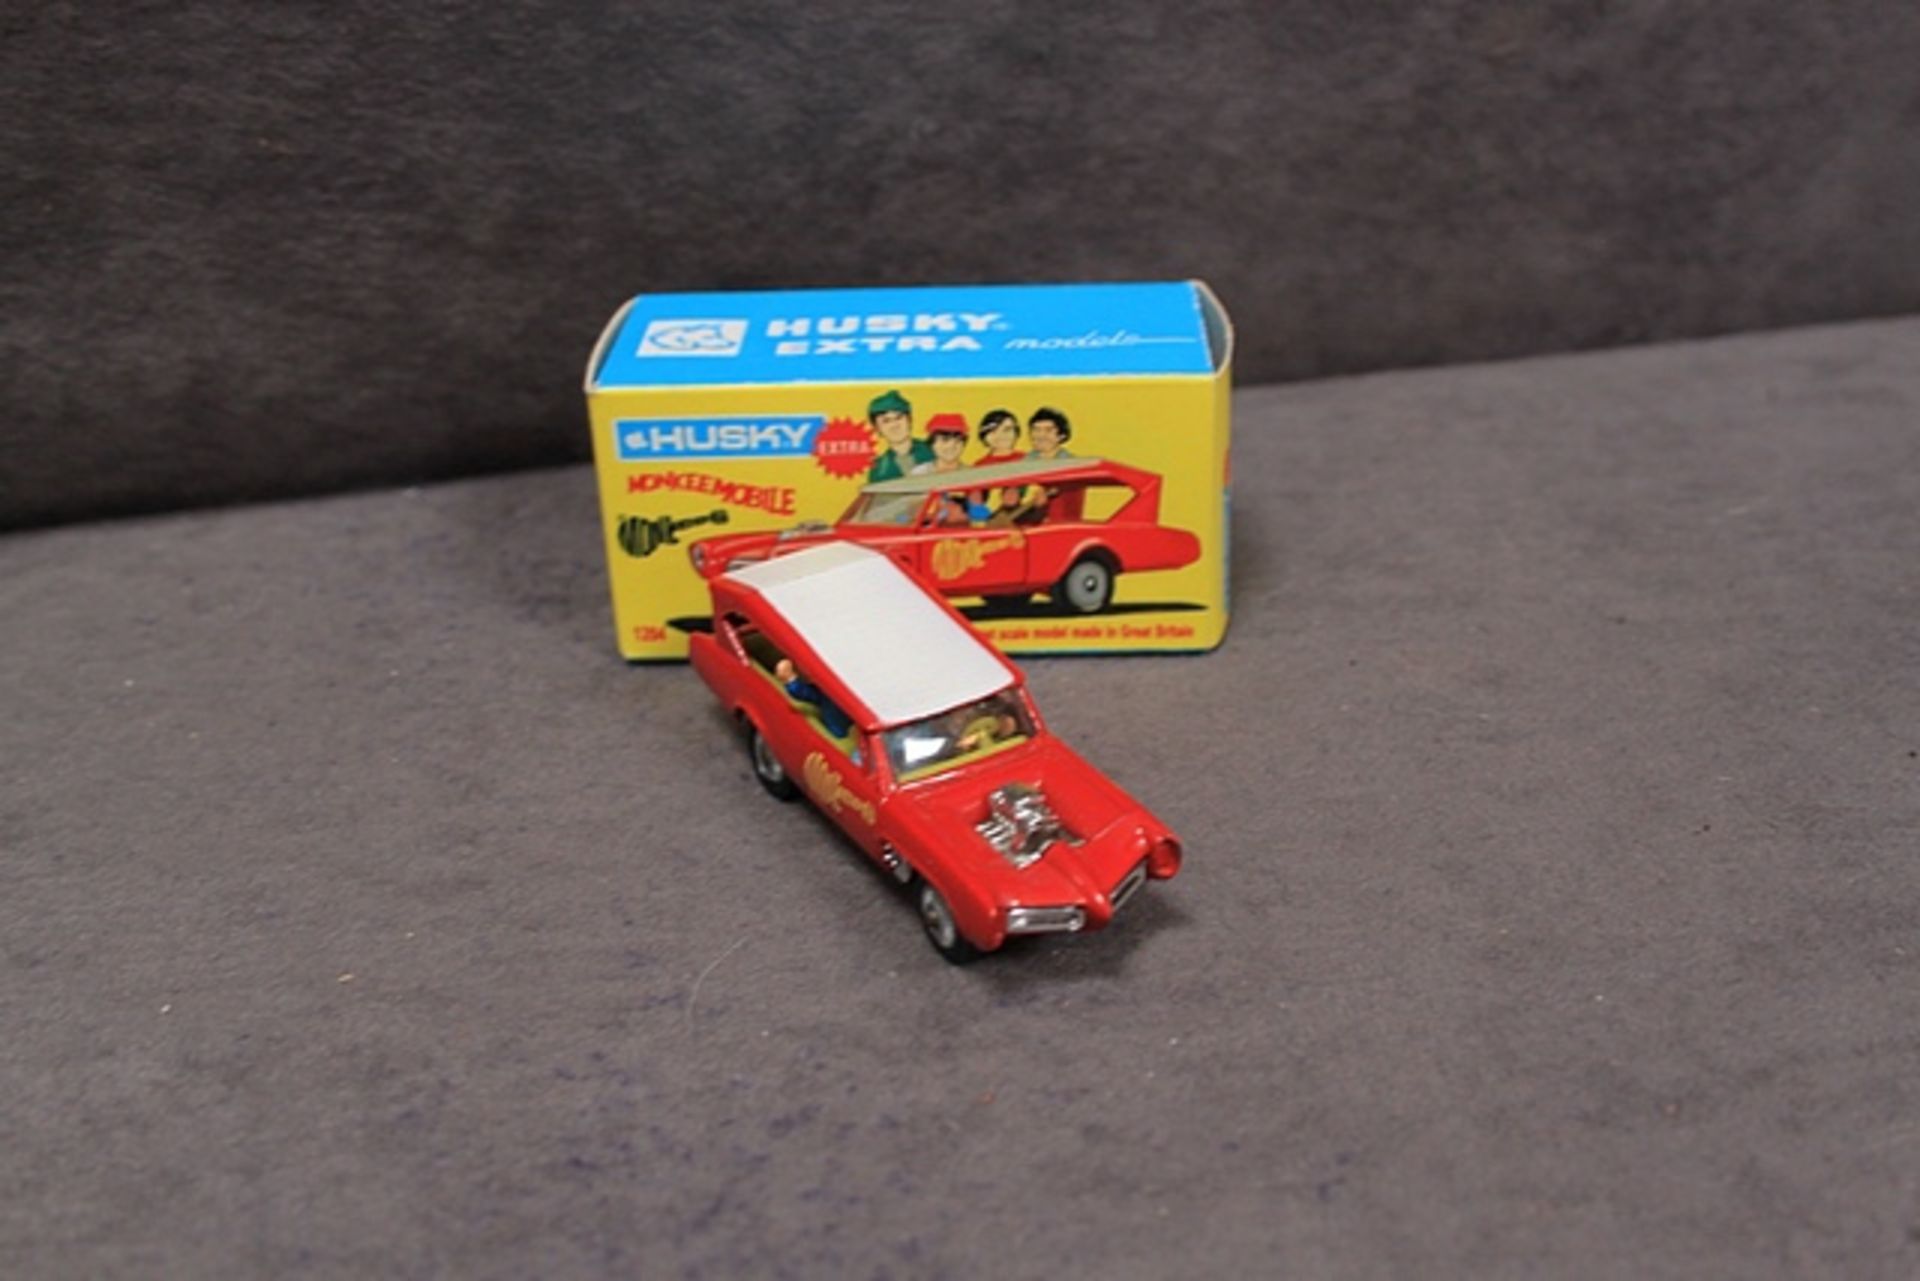 Husky diecast #1204 Monkeemobile in manufactured box - Image 2 of 3